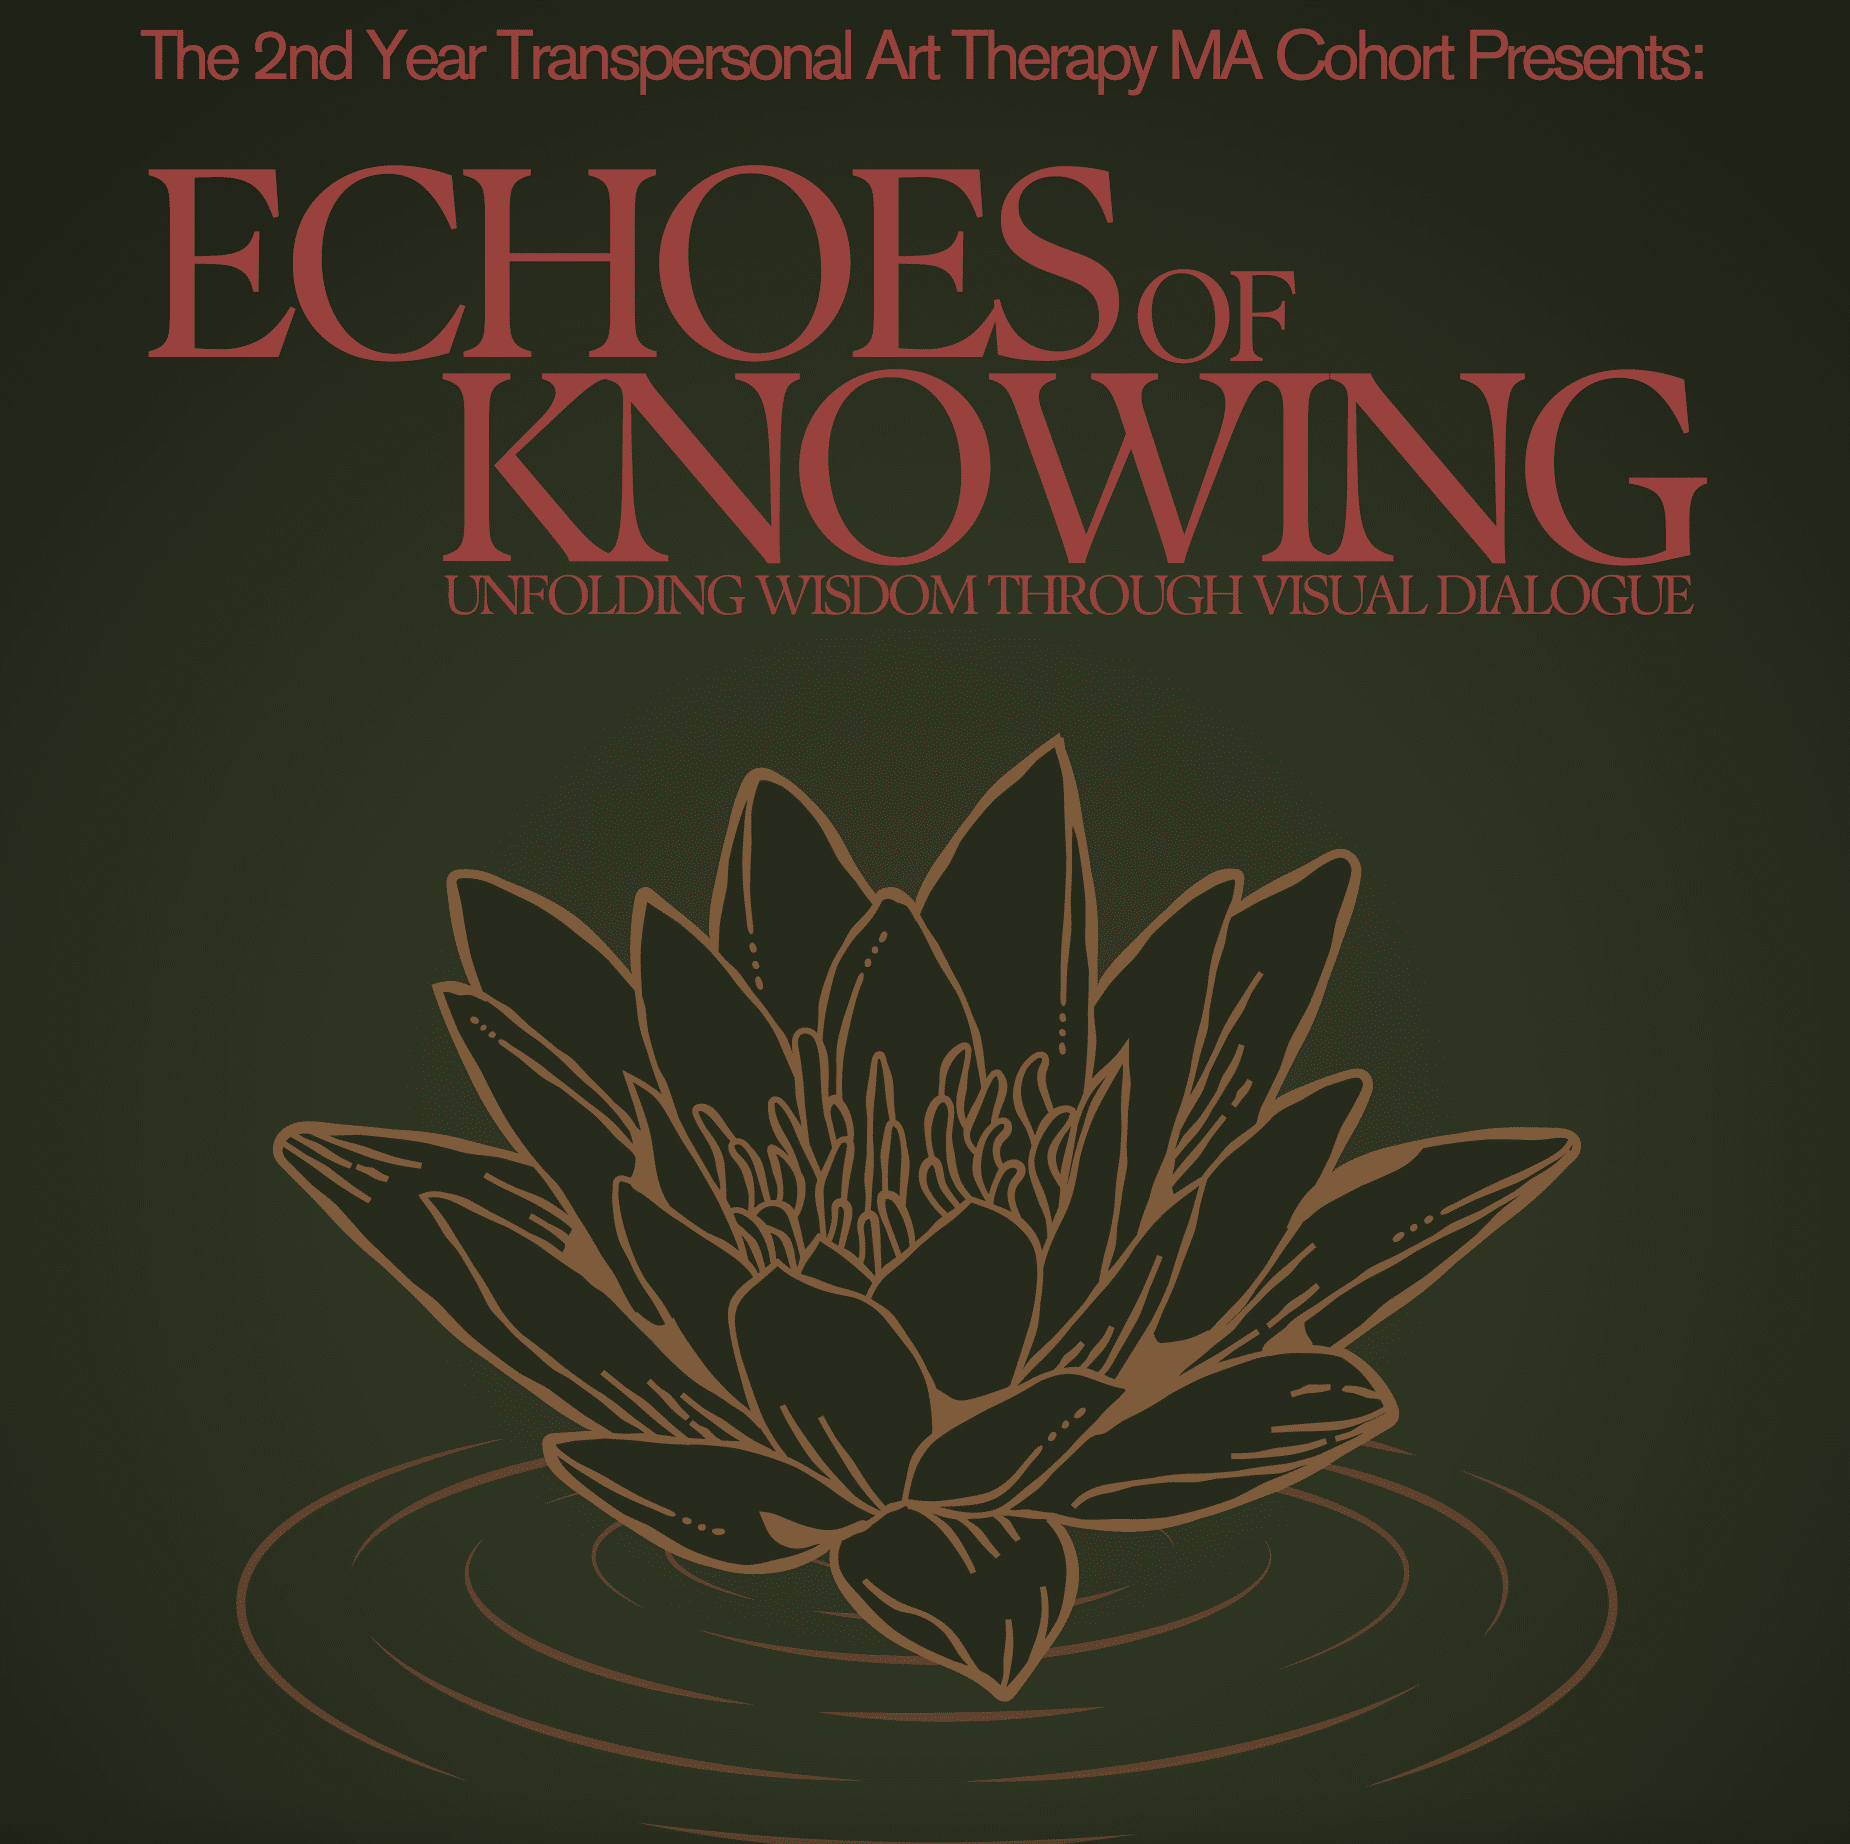 art poster for Echoes of Knowing exhibit